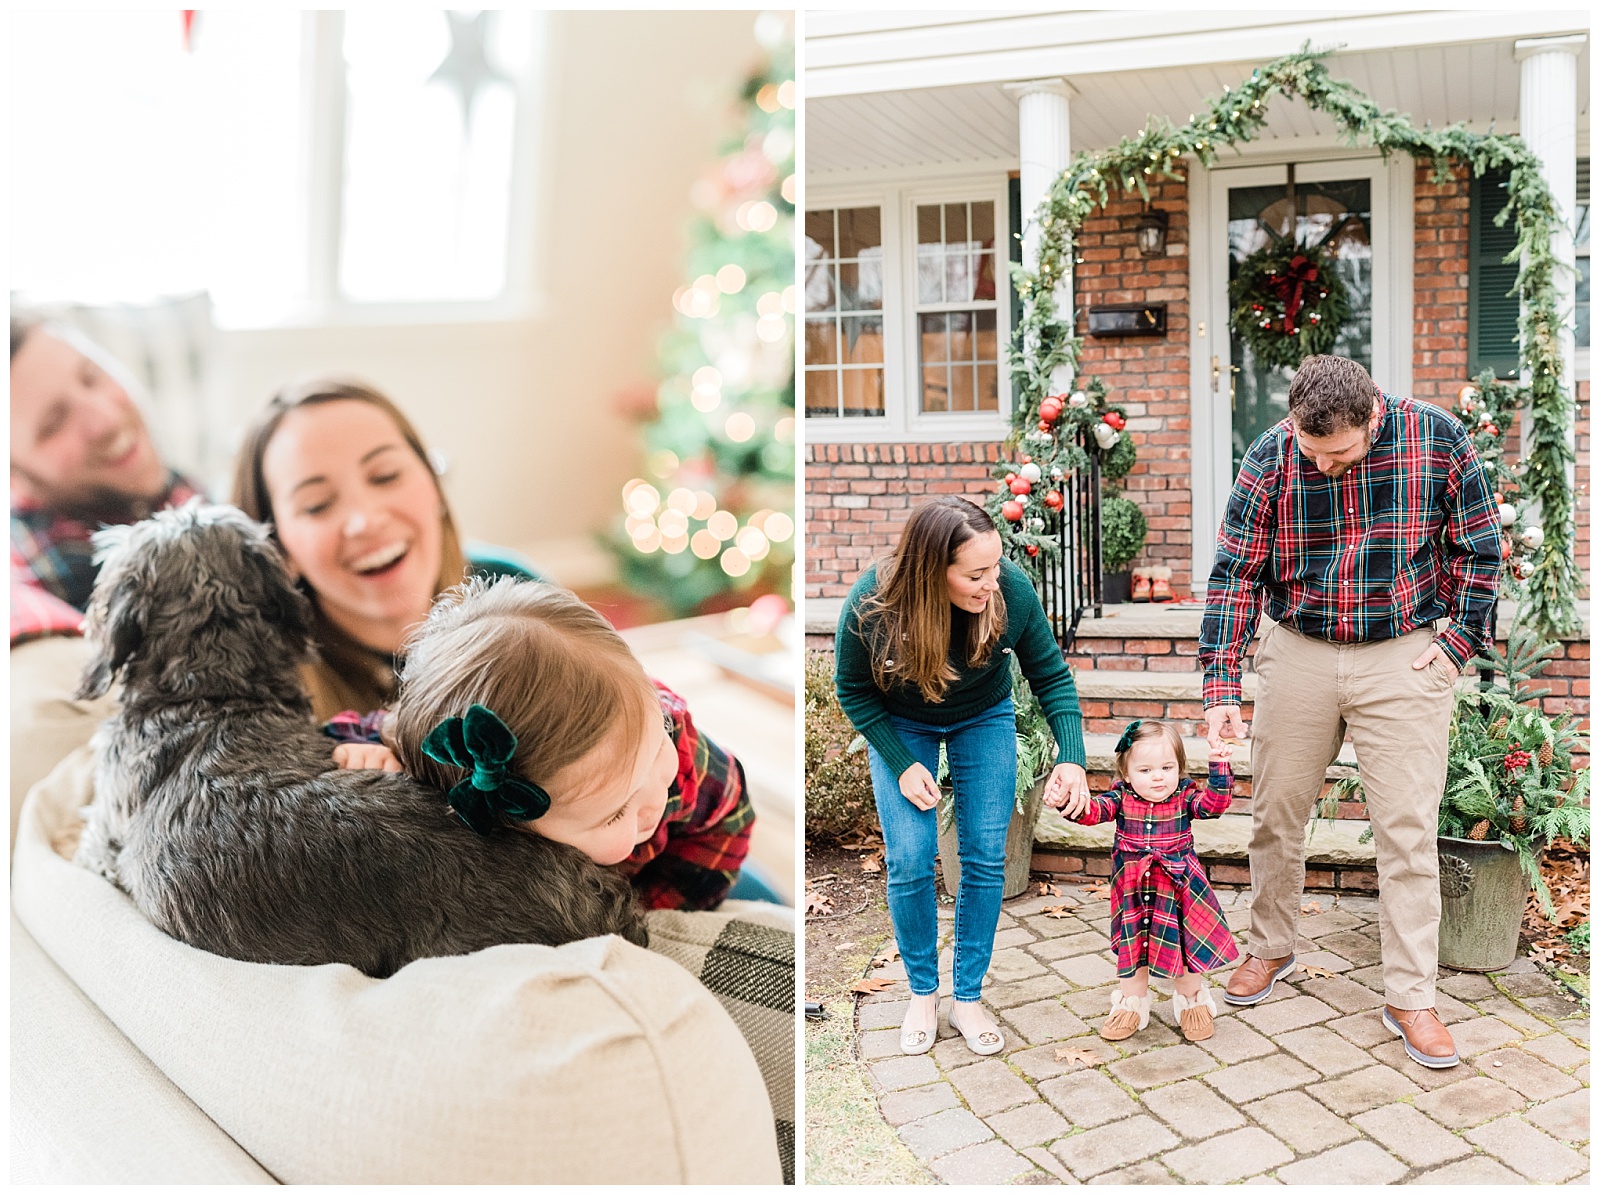 in-home-family-holiday-session-winter-christmas-cozy-photographer-nj-new-jersey-photo_0029.jpg